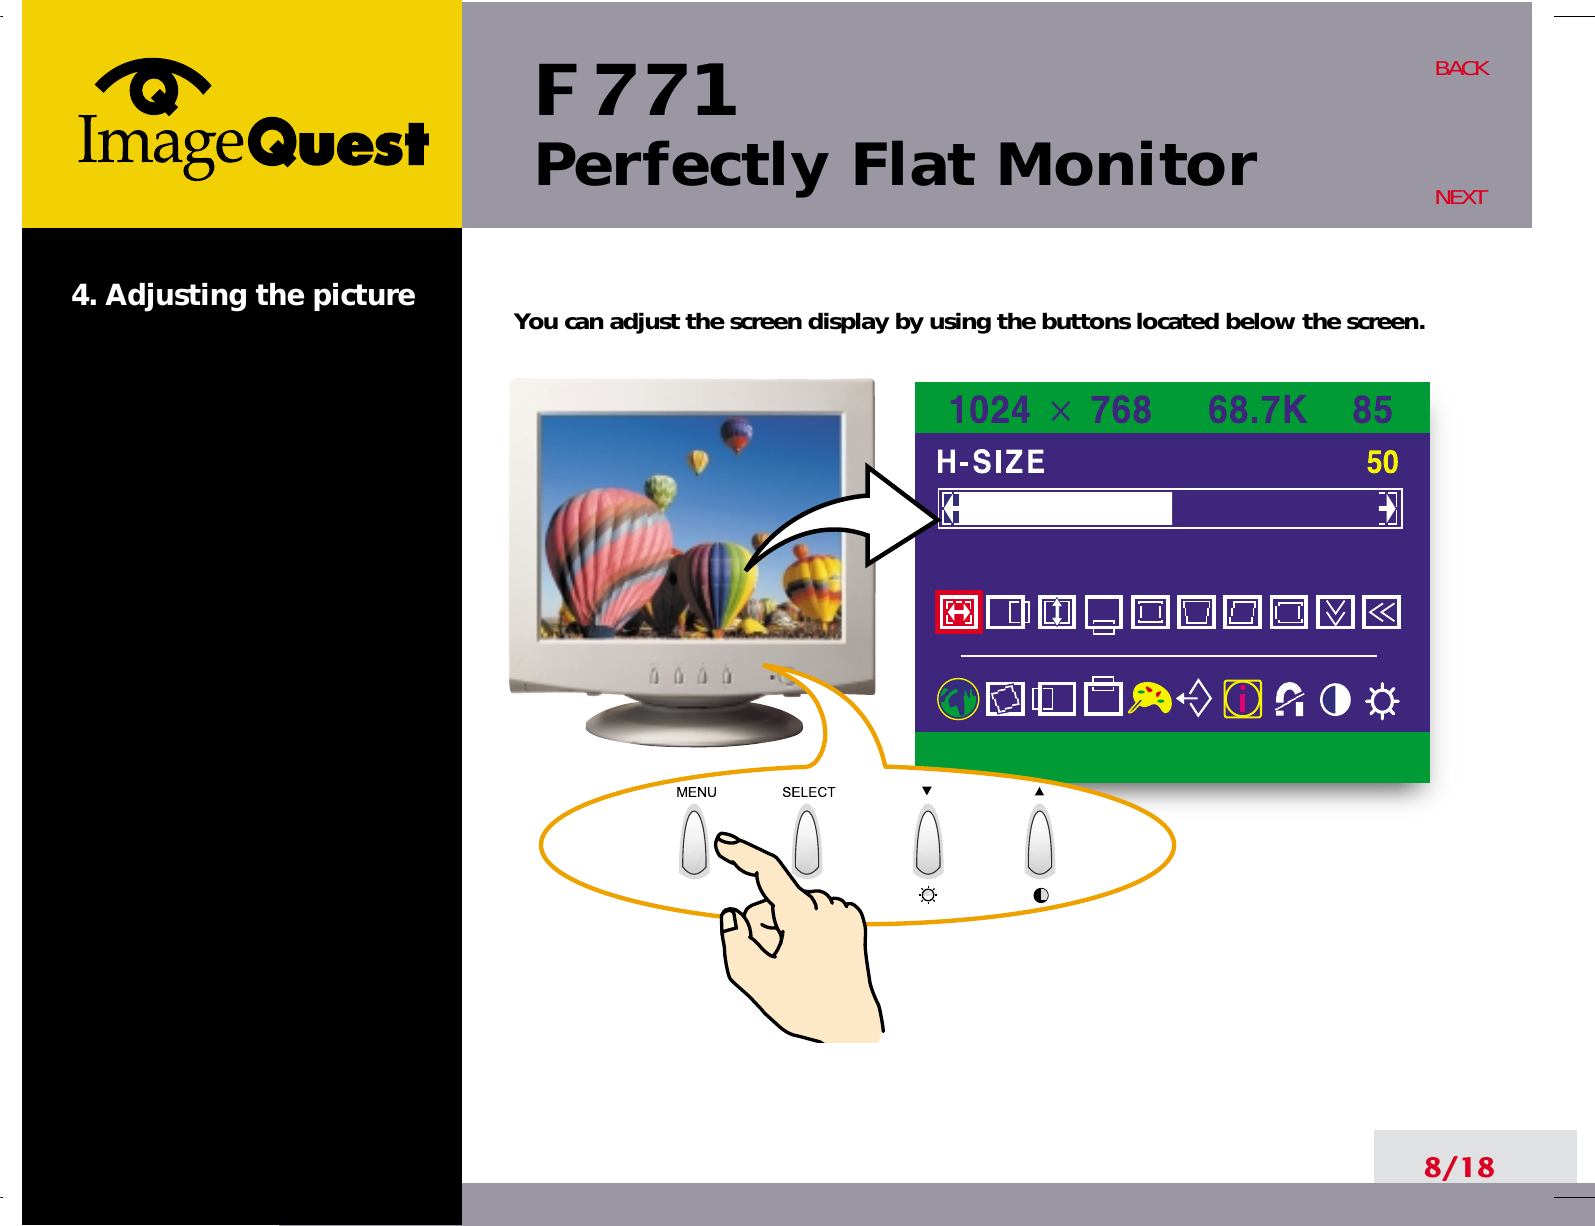 F 771Perfectly Flat Monitor8/18BACKNEXT4. Adjusting the picture You can adjust the screen display by using the buttons located below the screen.